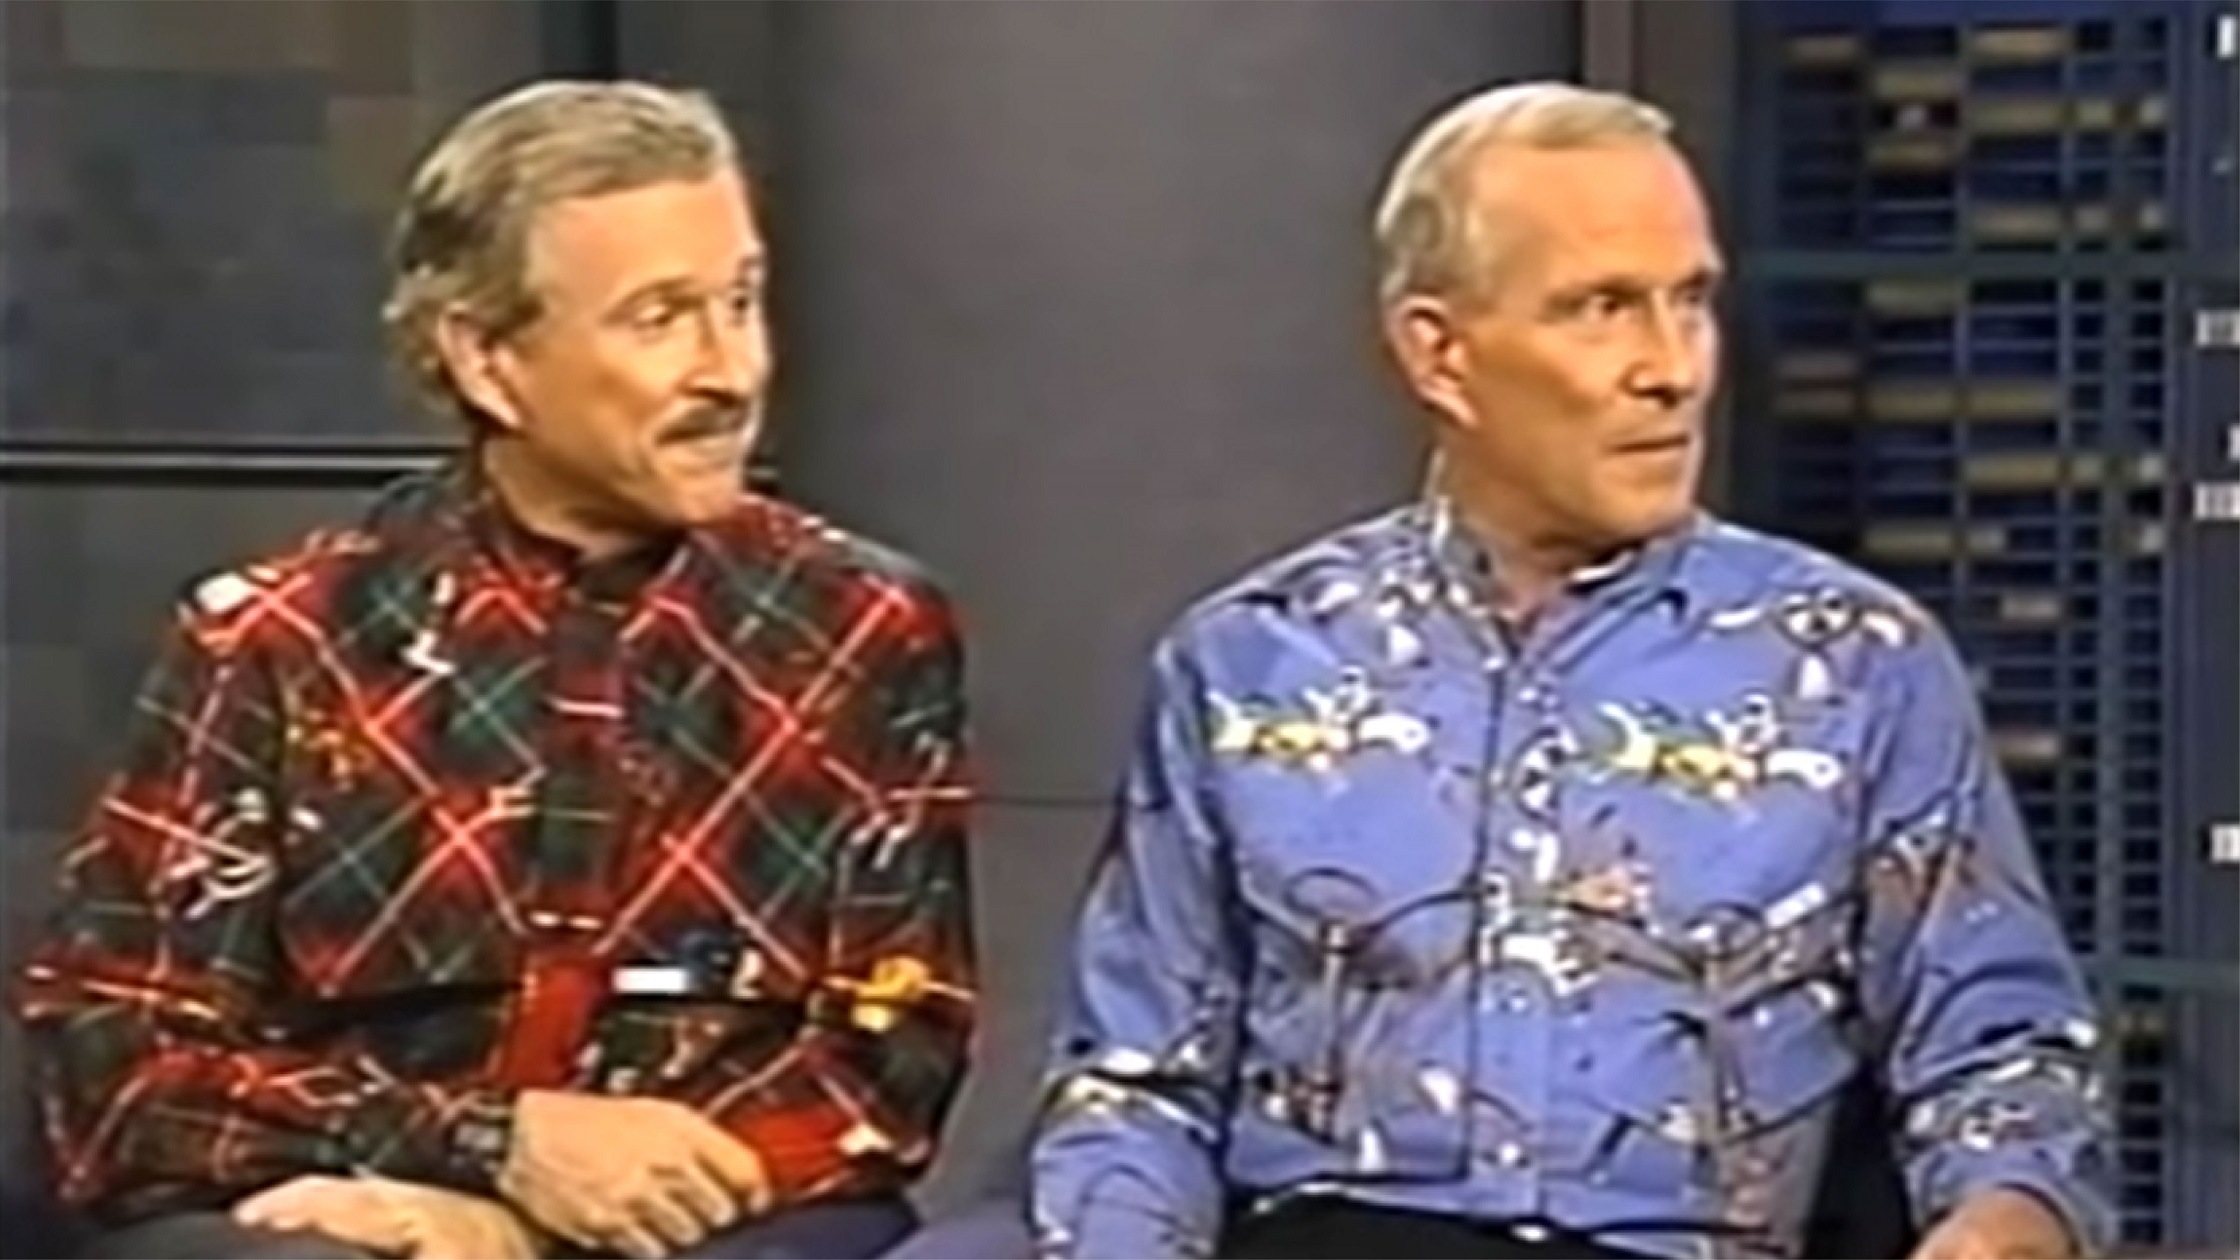 Smothers brothers wearing colorful and vibrant clothes